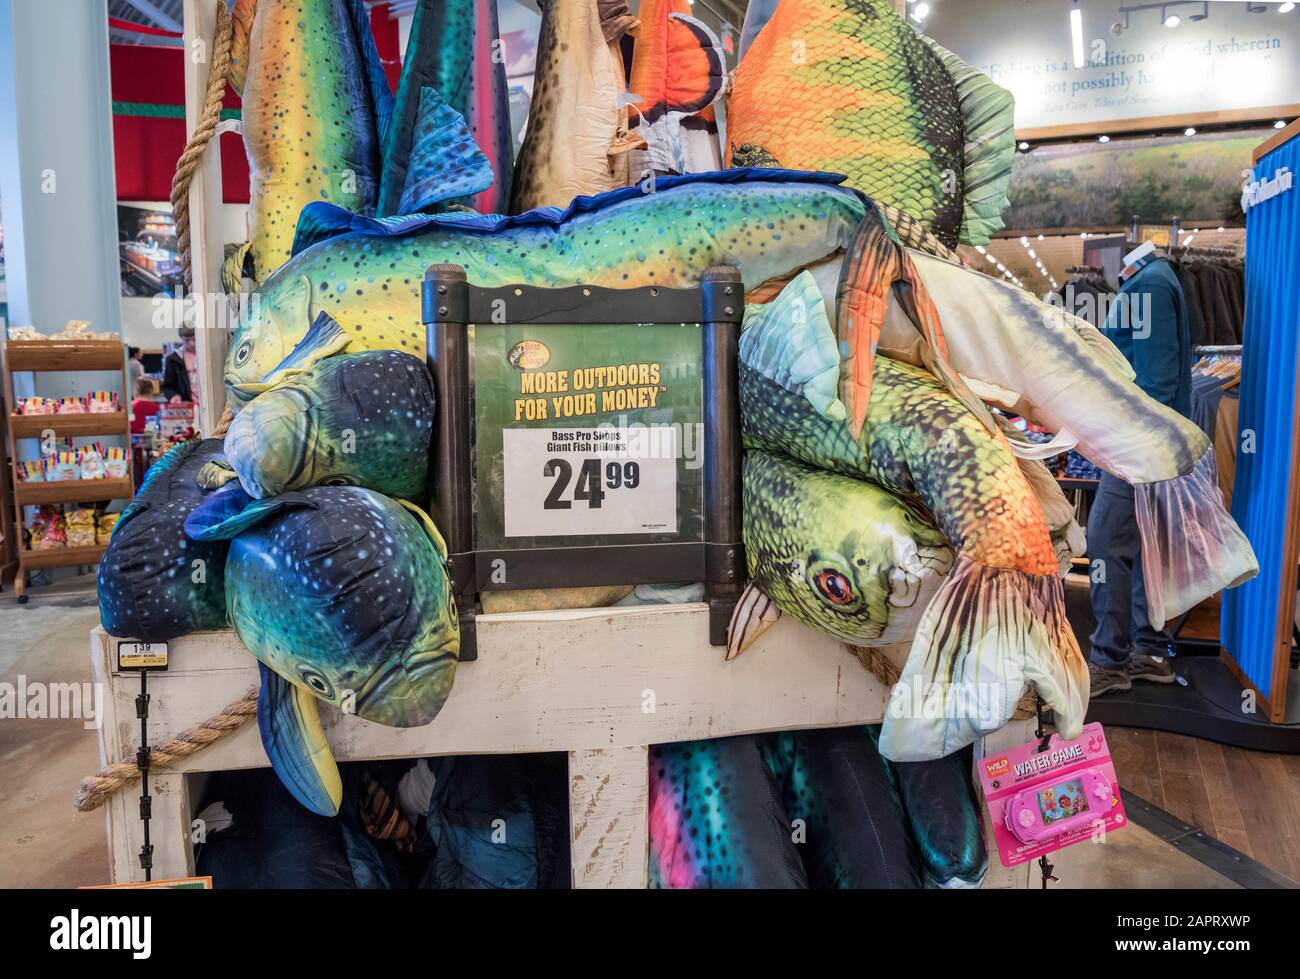 Beautiful and colorful large stuffed game fish at Bass Pro Shops outdoors store, Gainesville, Florida. Stock Photo